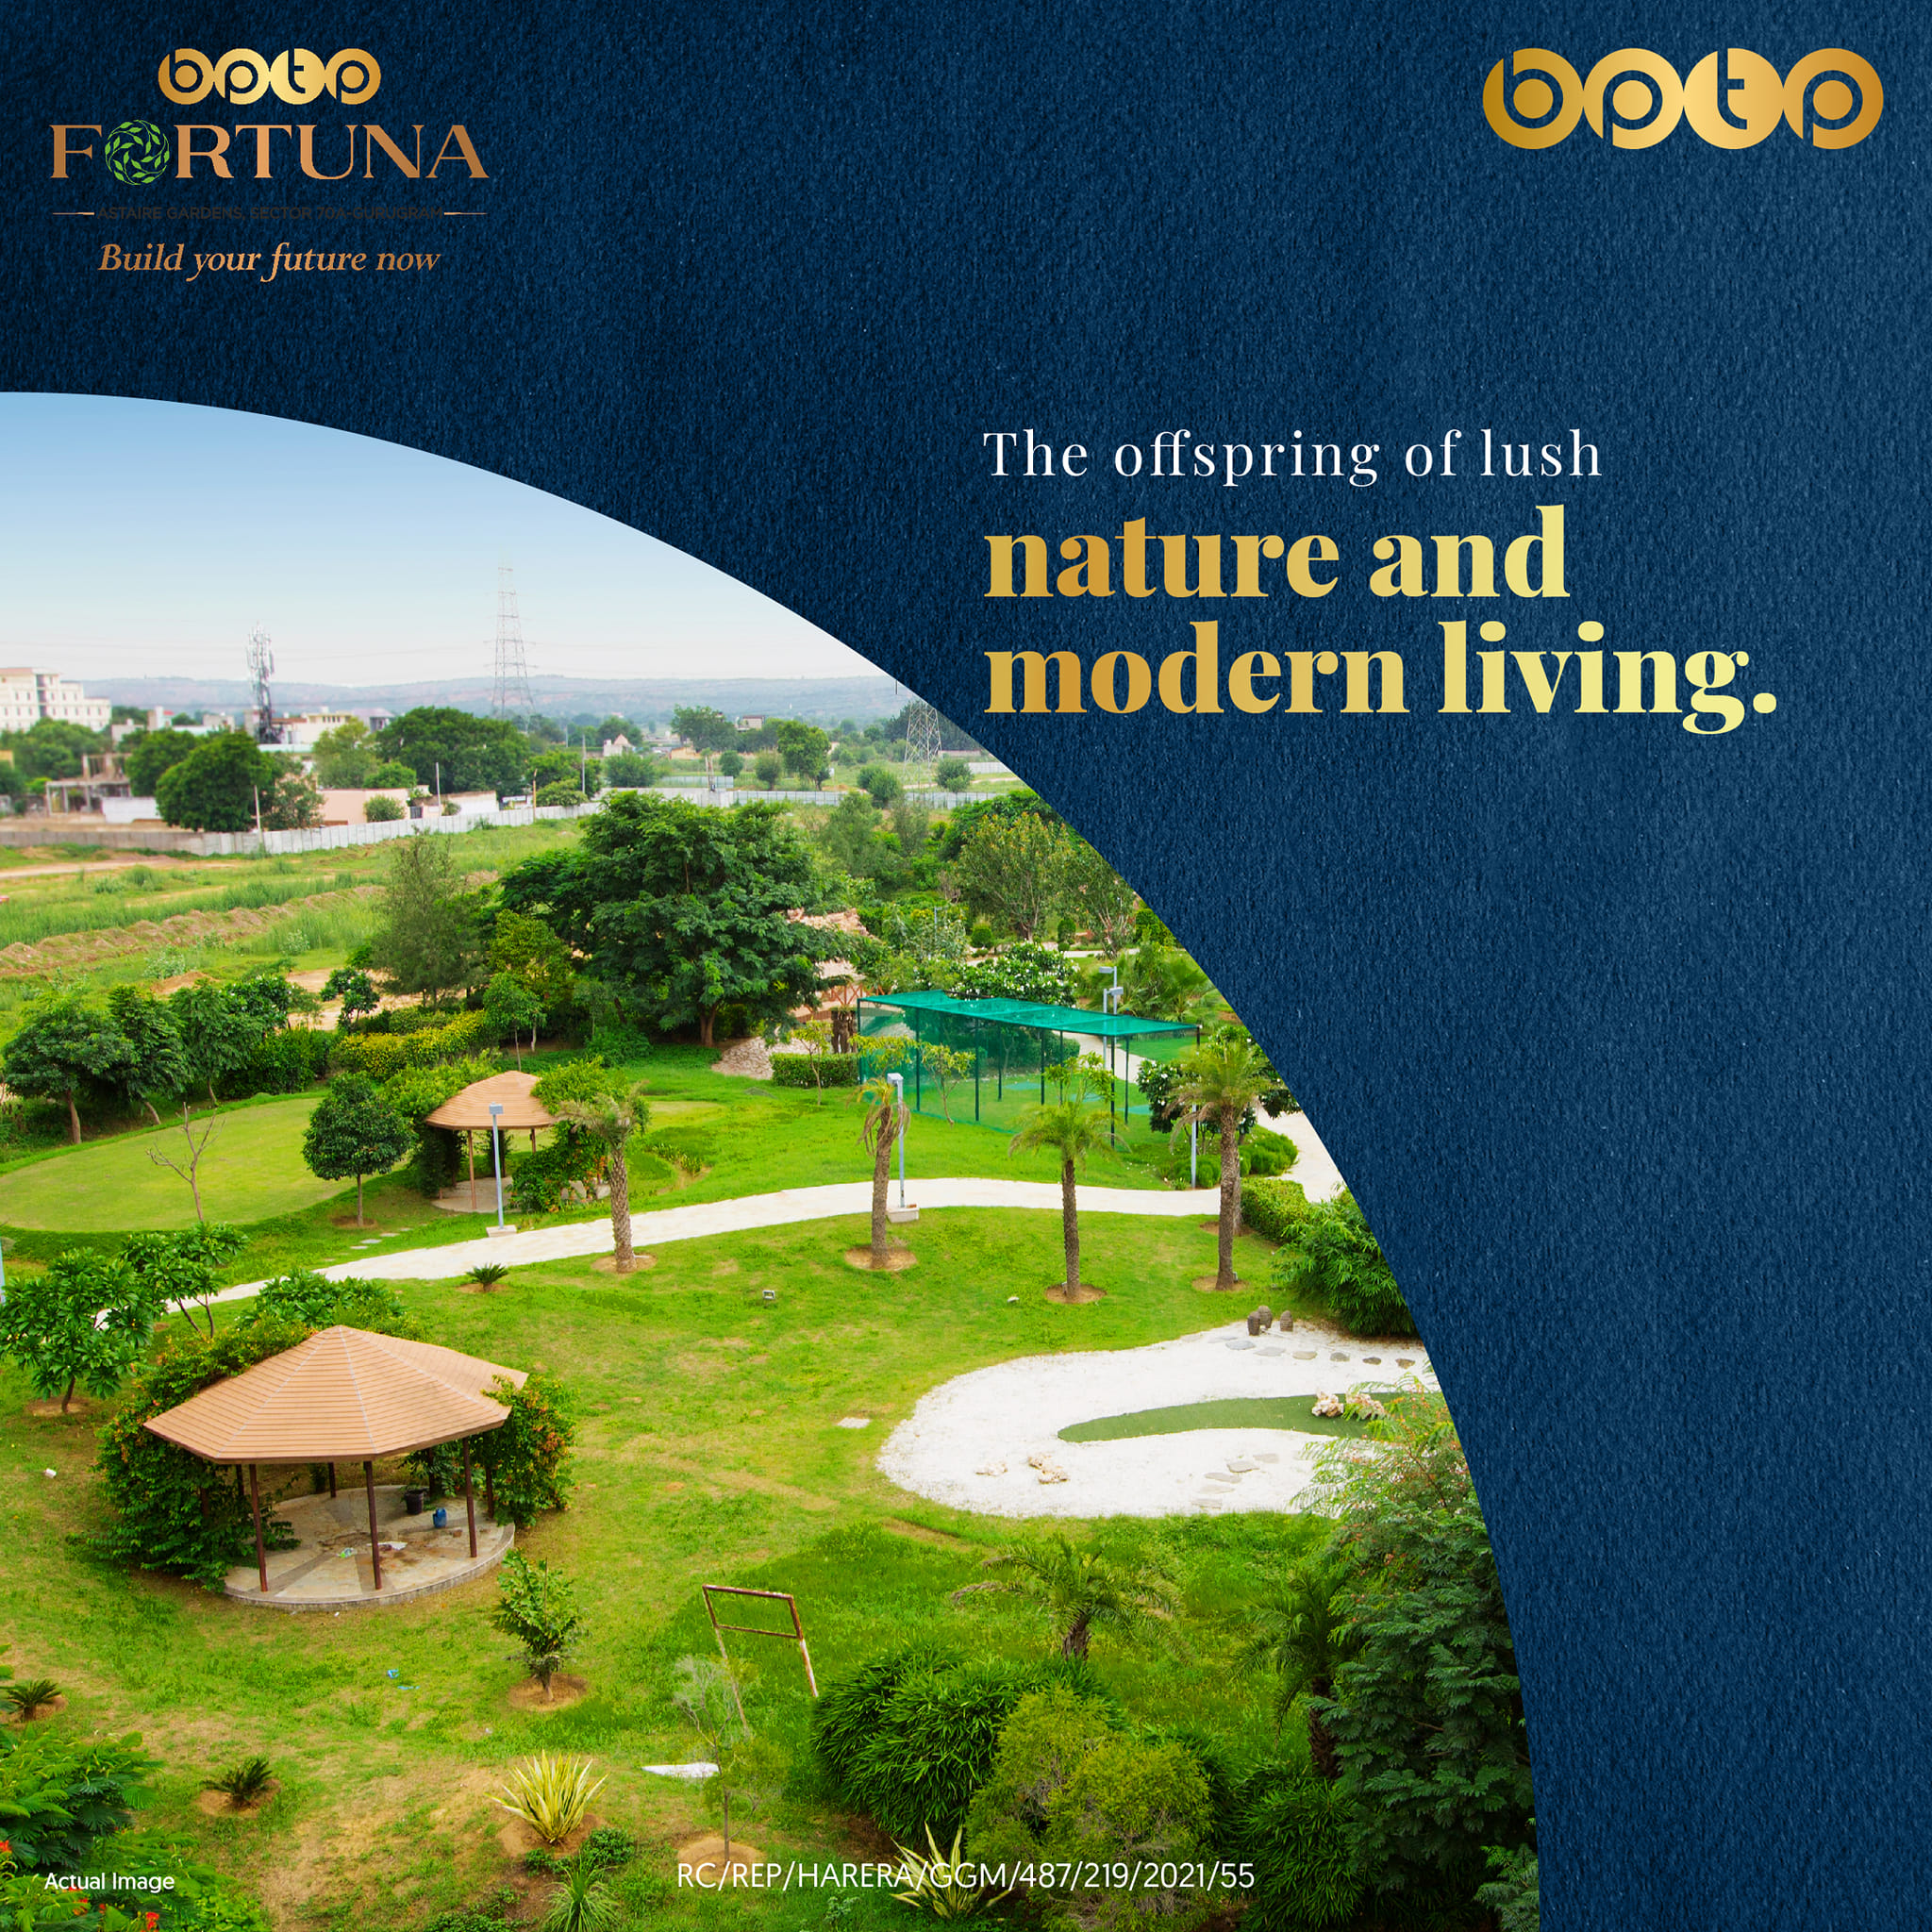 Discover a serene oasis amidst modern living with BPTP Fortuna, Gurgaon